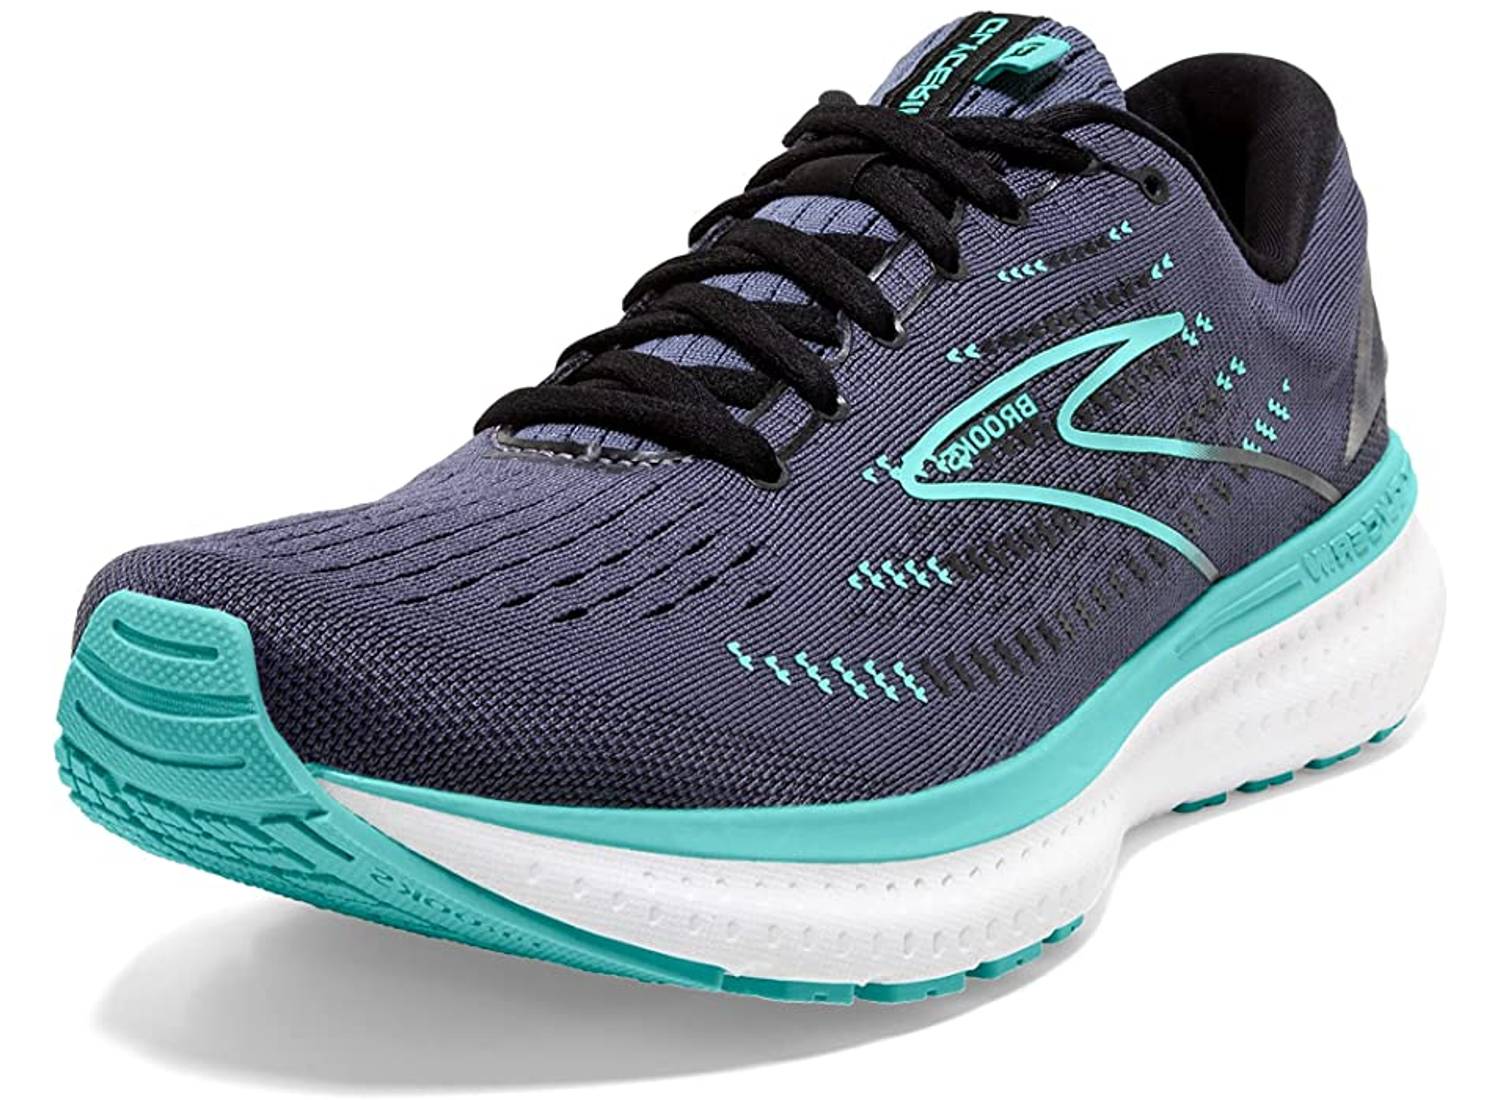 A pair of grey, white and teal running sneakers from Brook's